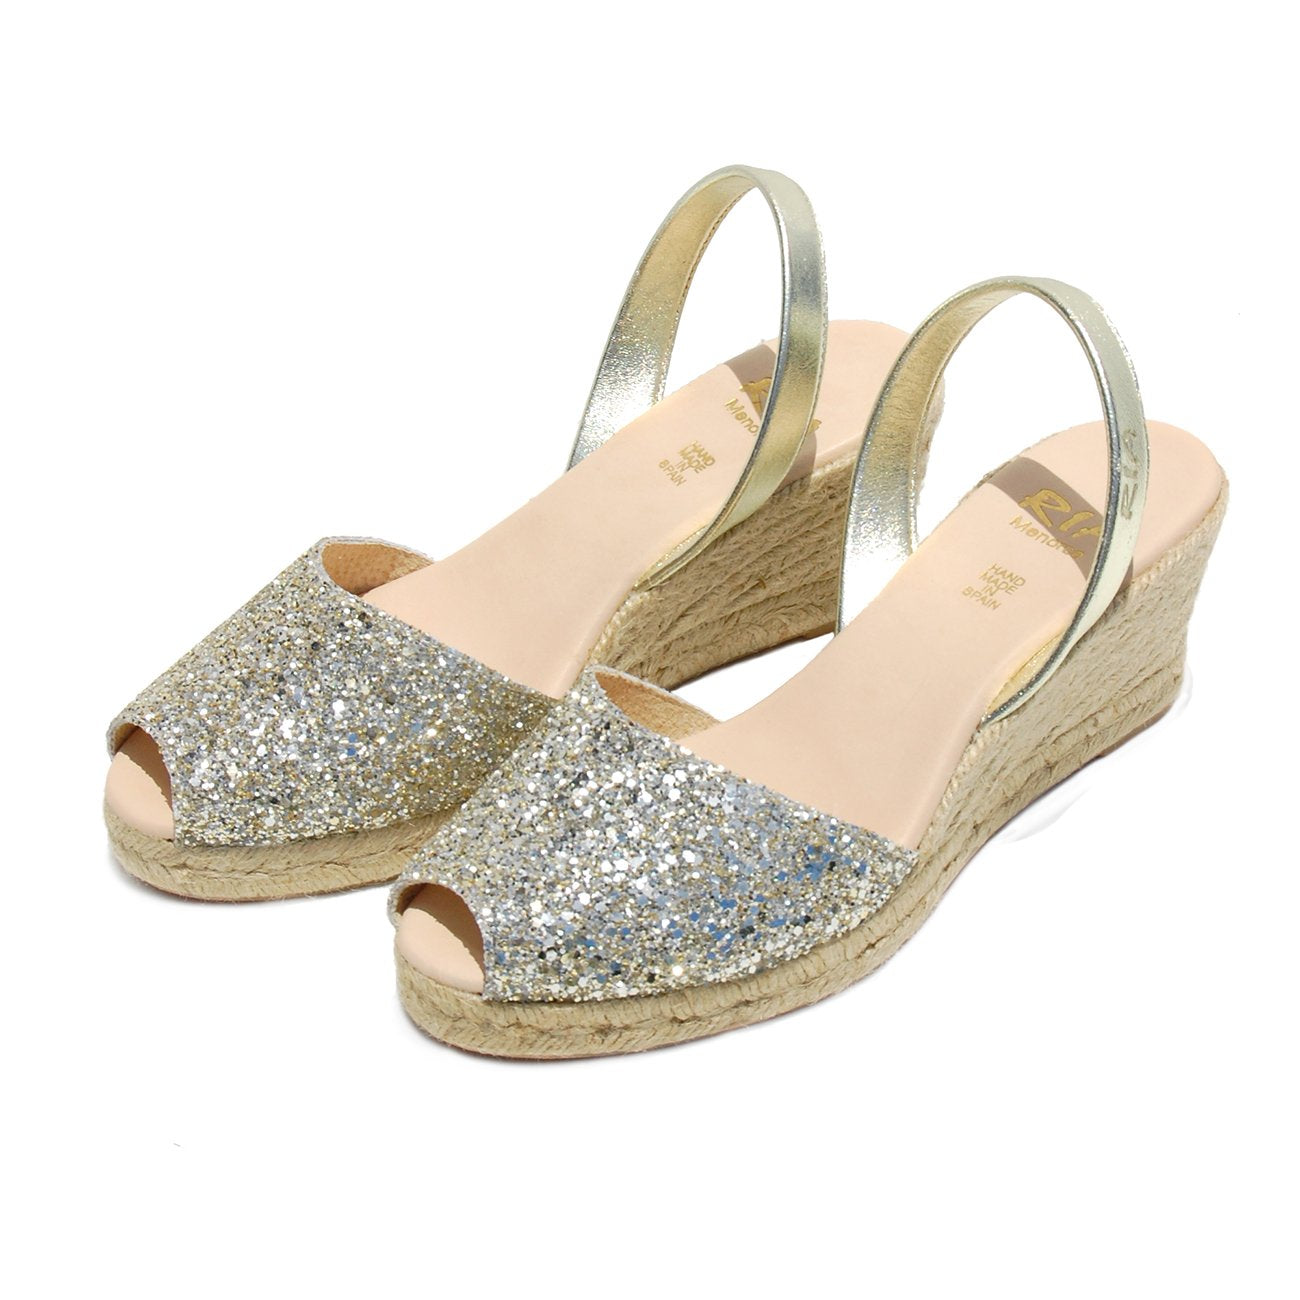 Parallel Culture Shoes and Fashion Online WEDGES RIA MENORCA LLUNA GLITTER WEDGE CHAMPAGNE